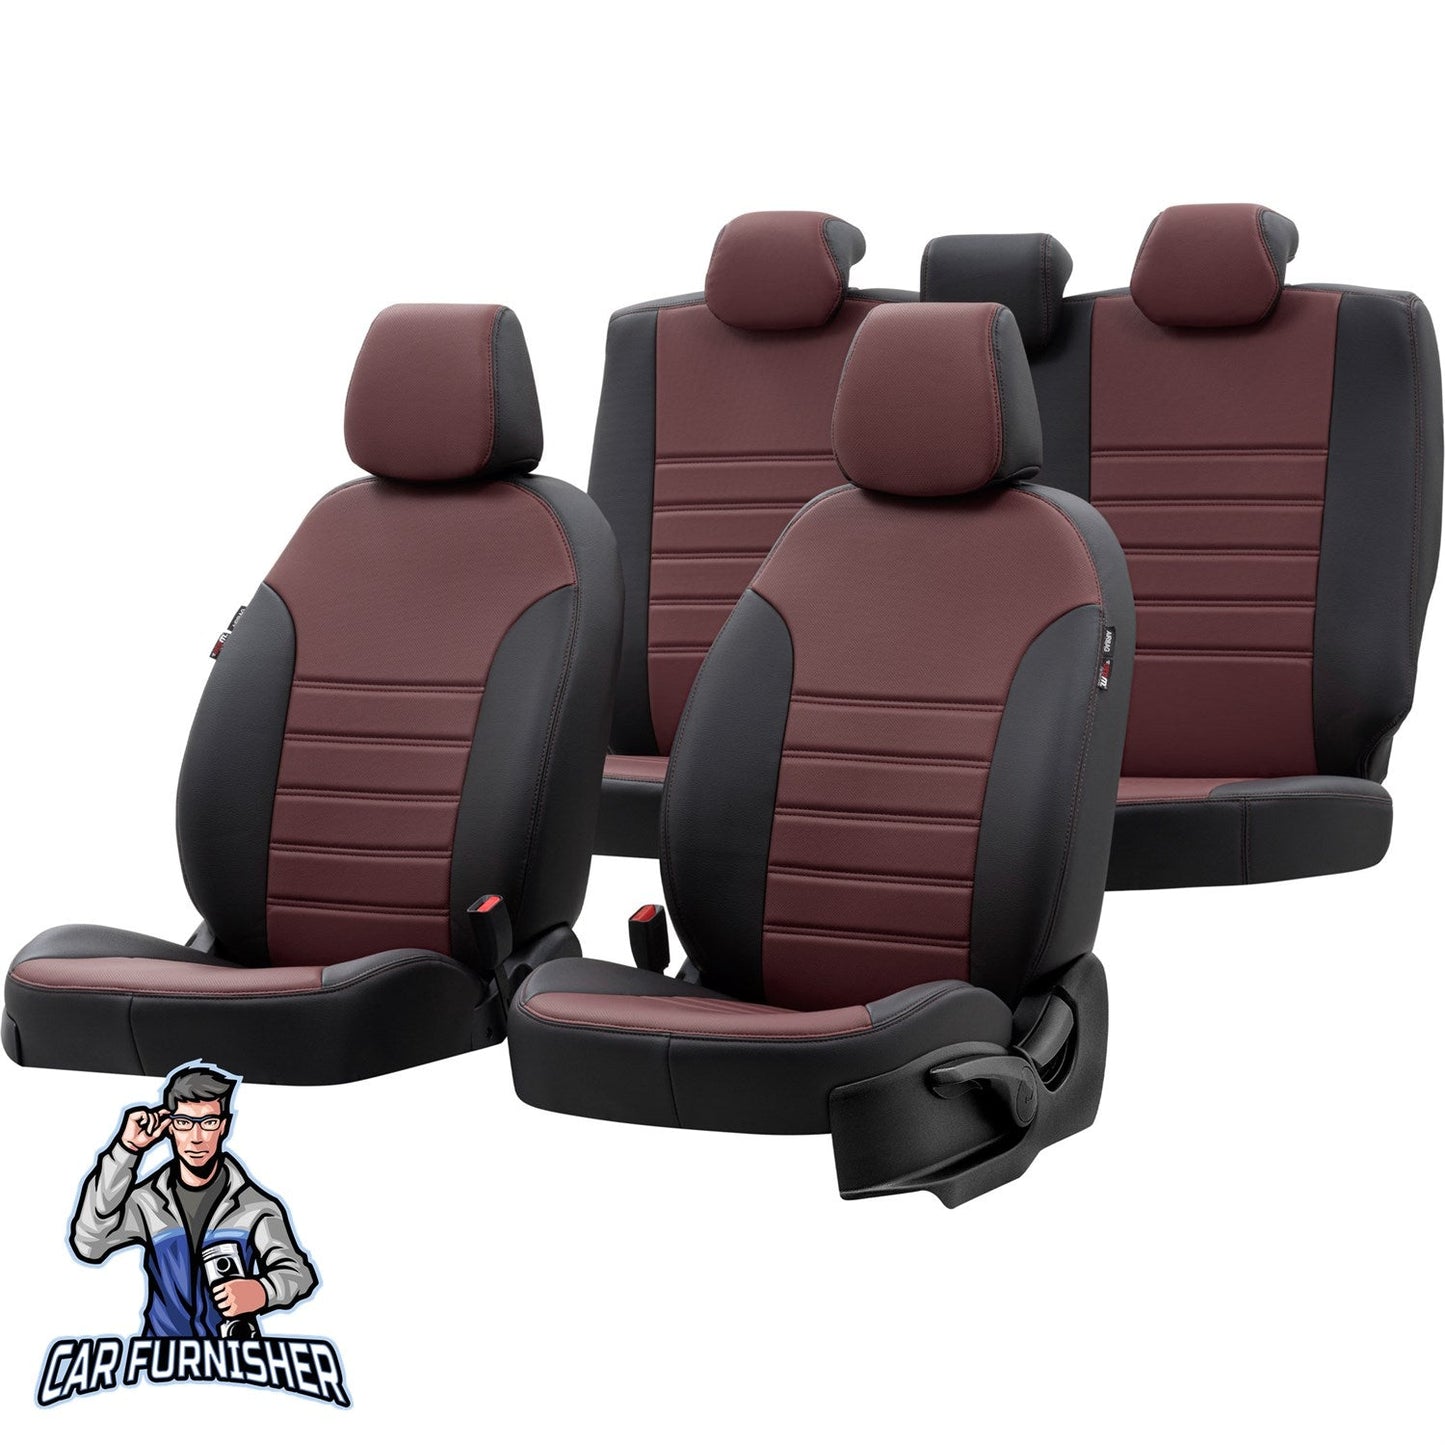 Volvo S40 Seat Cover Istanbul Leather Design Burgundy Leather